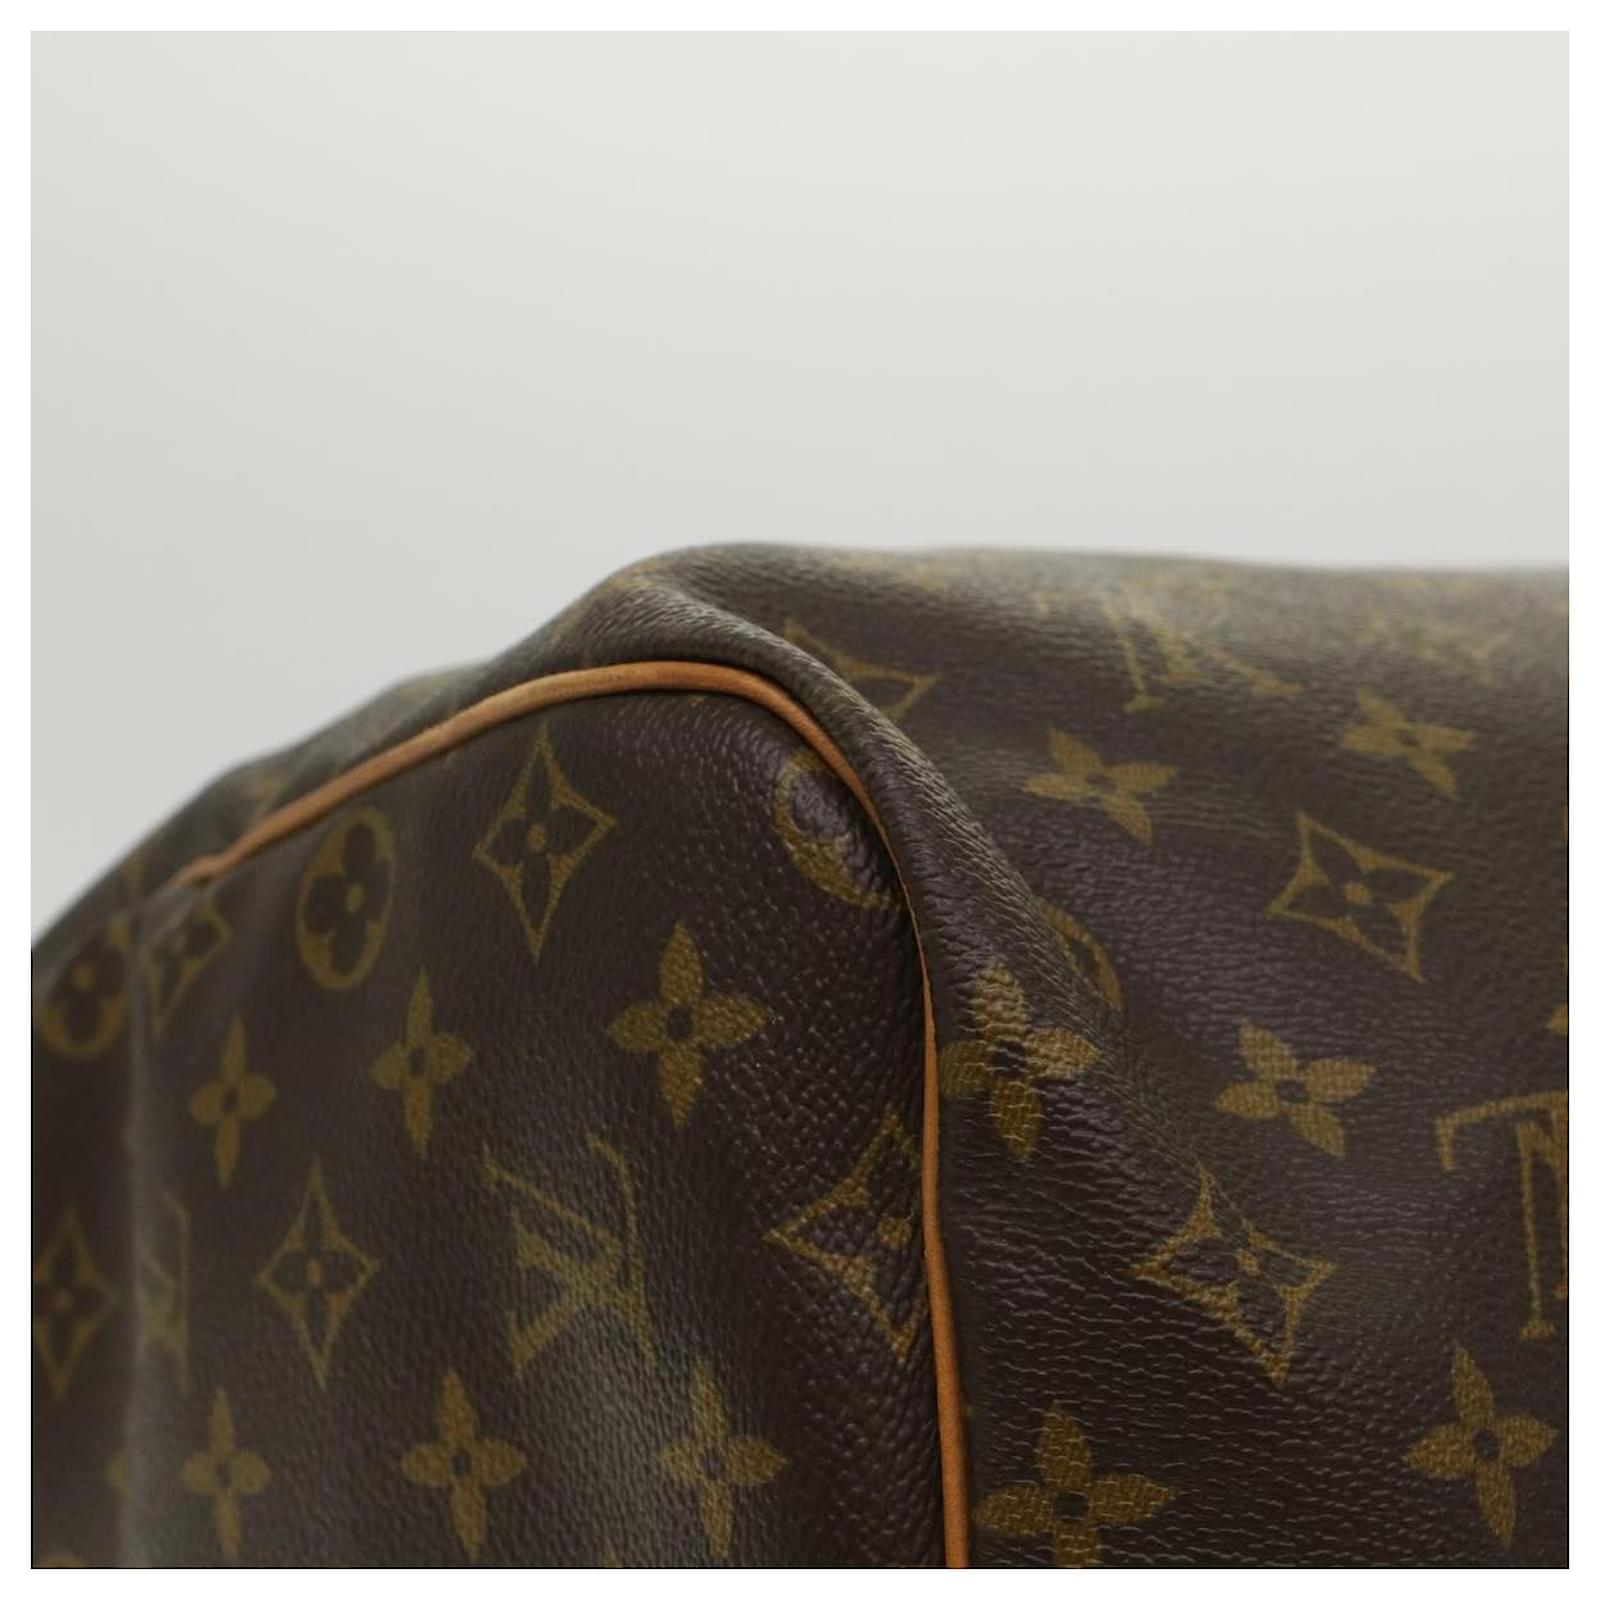 Louis Vuitton Keepall 60 With Shoulder Strap m41412